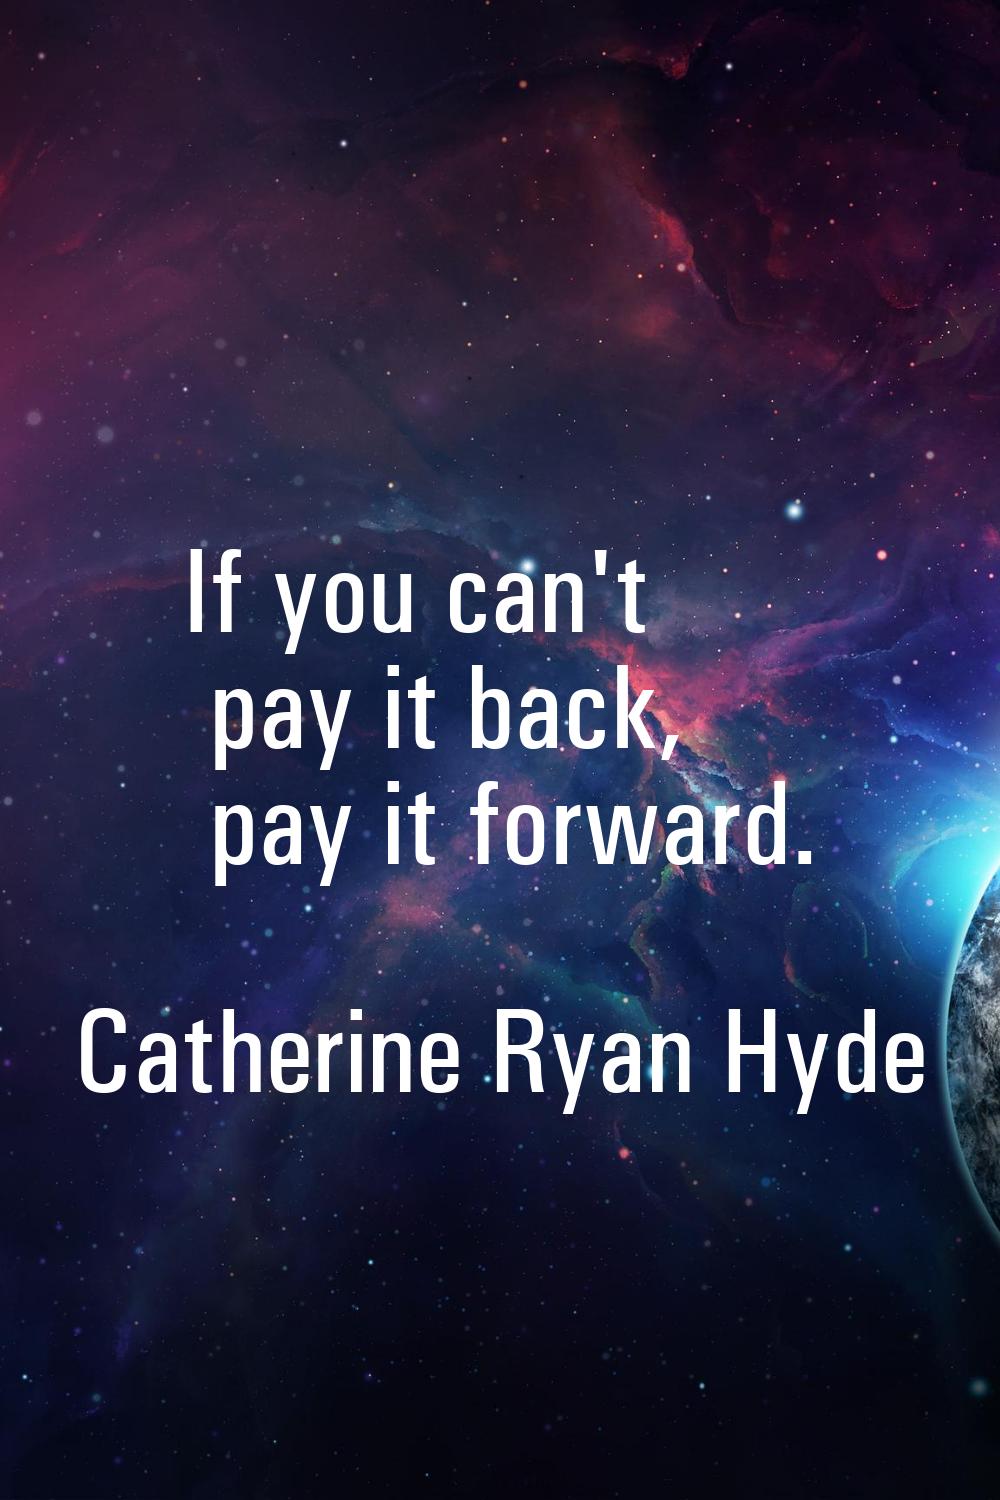 If you can't pay it back, pay it forward.